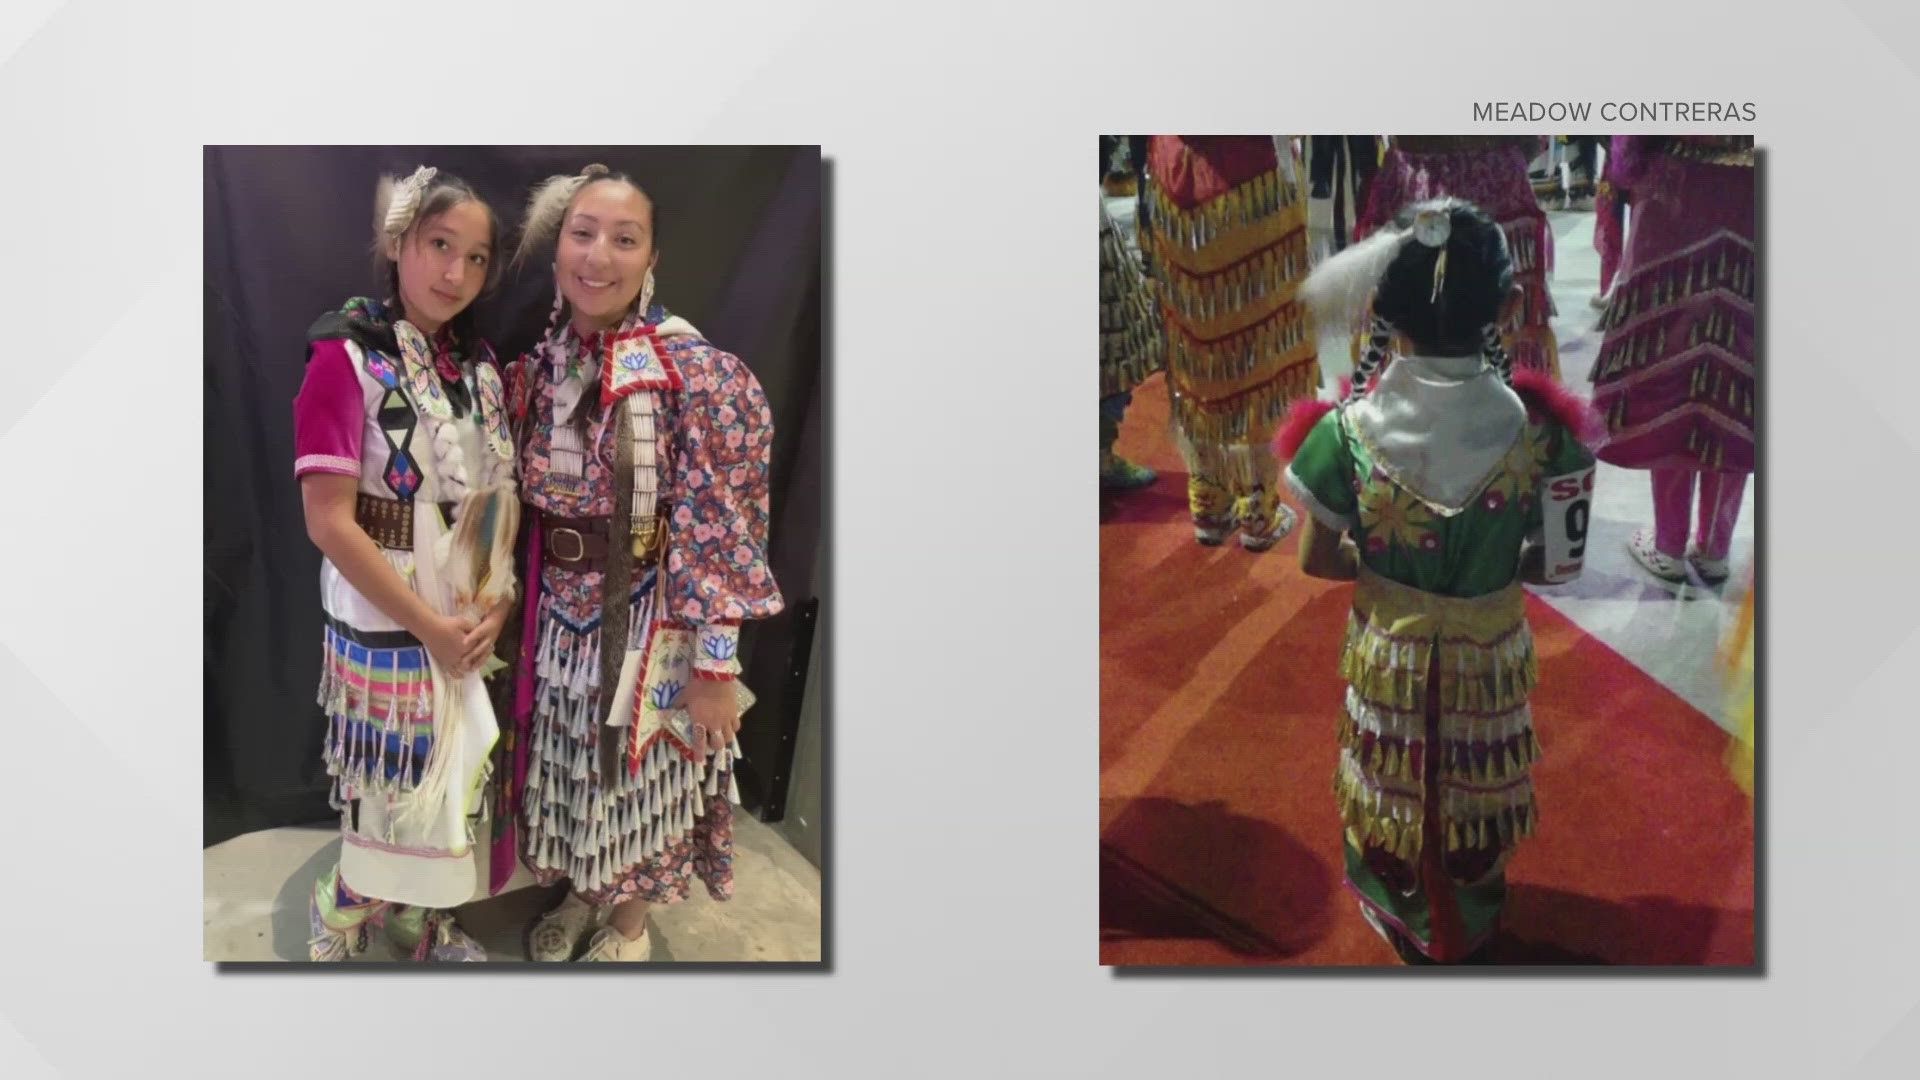 A bill allowing students to wear traditional Native American regalia to graduation ceremonies passed in the state Senate on Monday. Advocates say it's a first step.